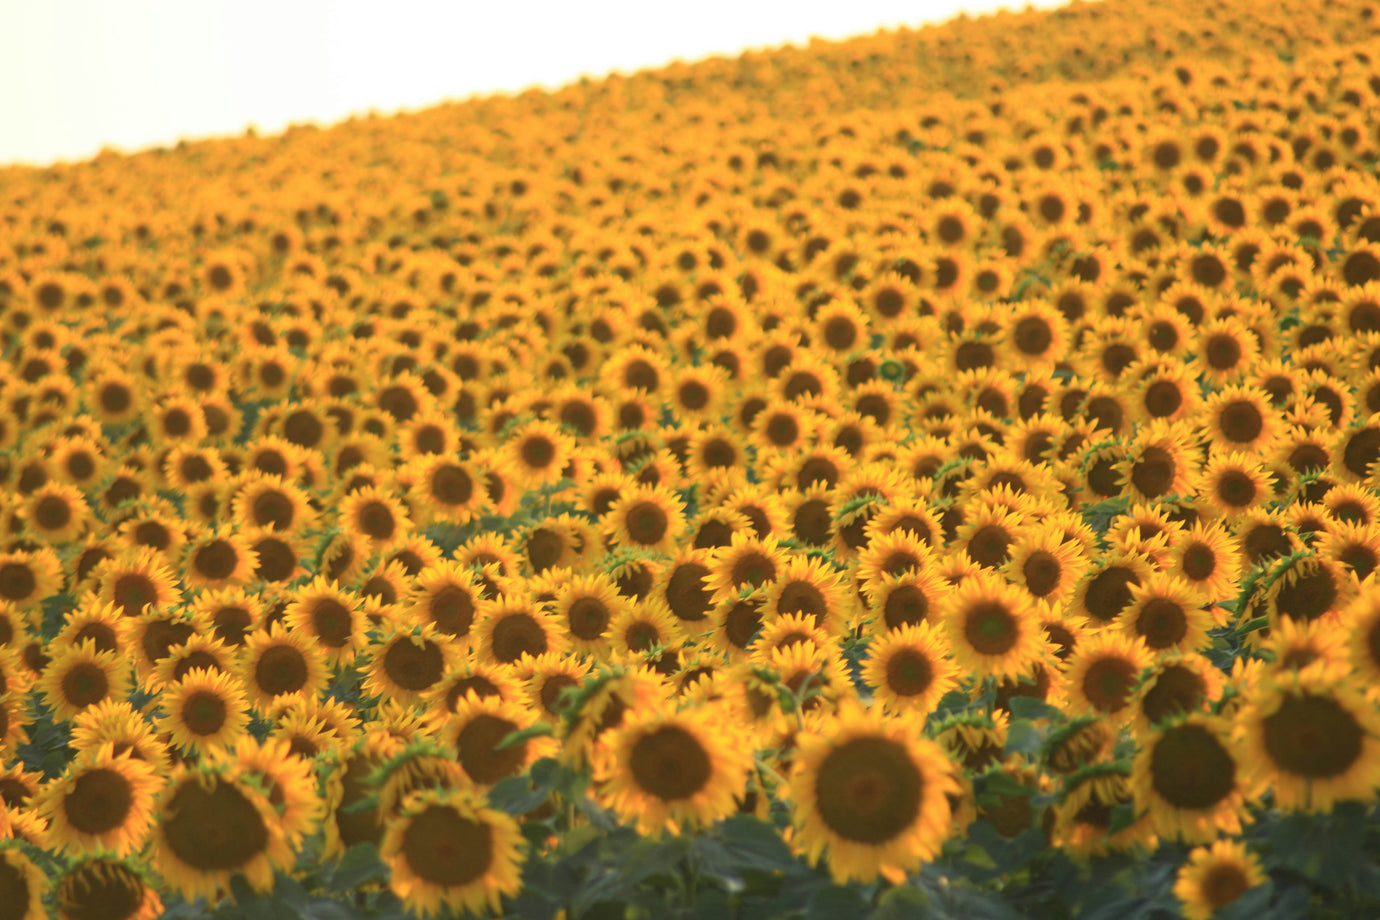 How Is Sunflower Oil Made?